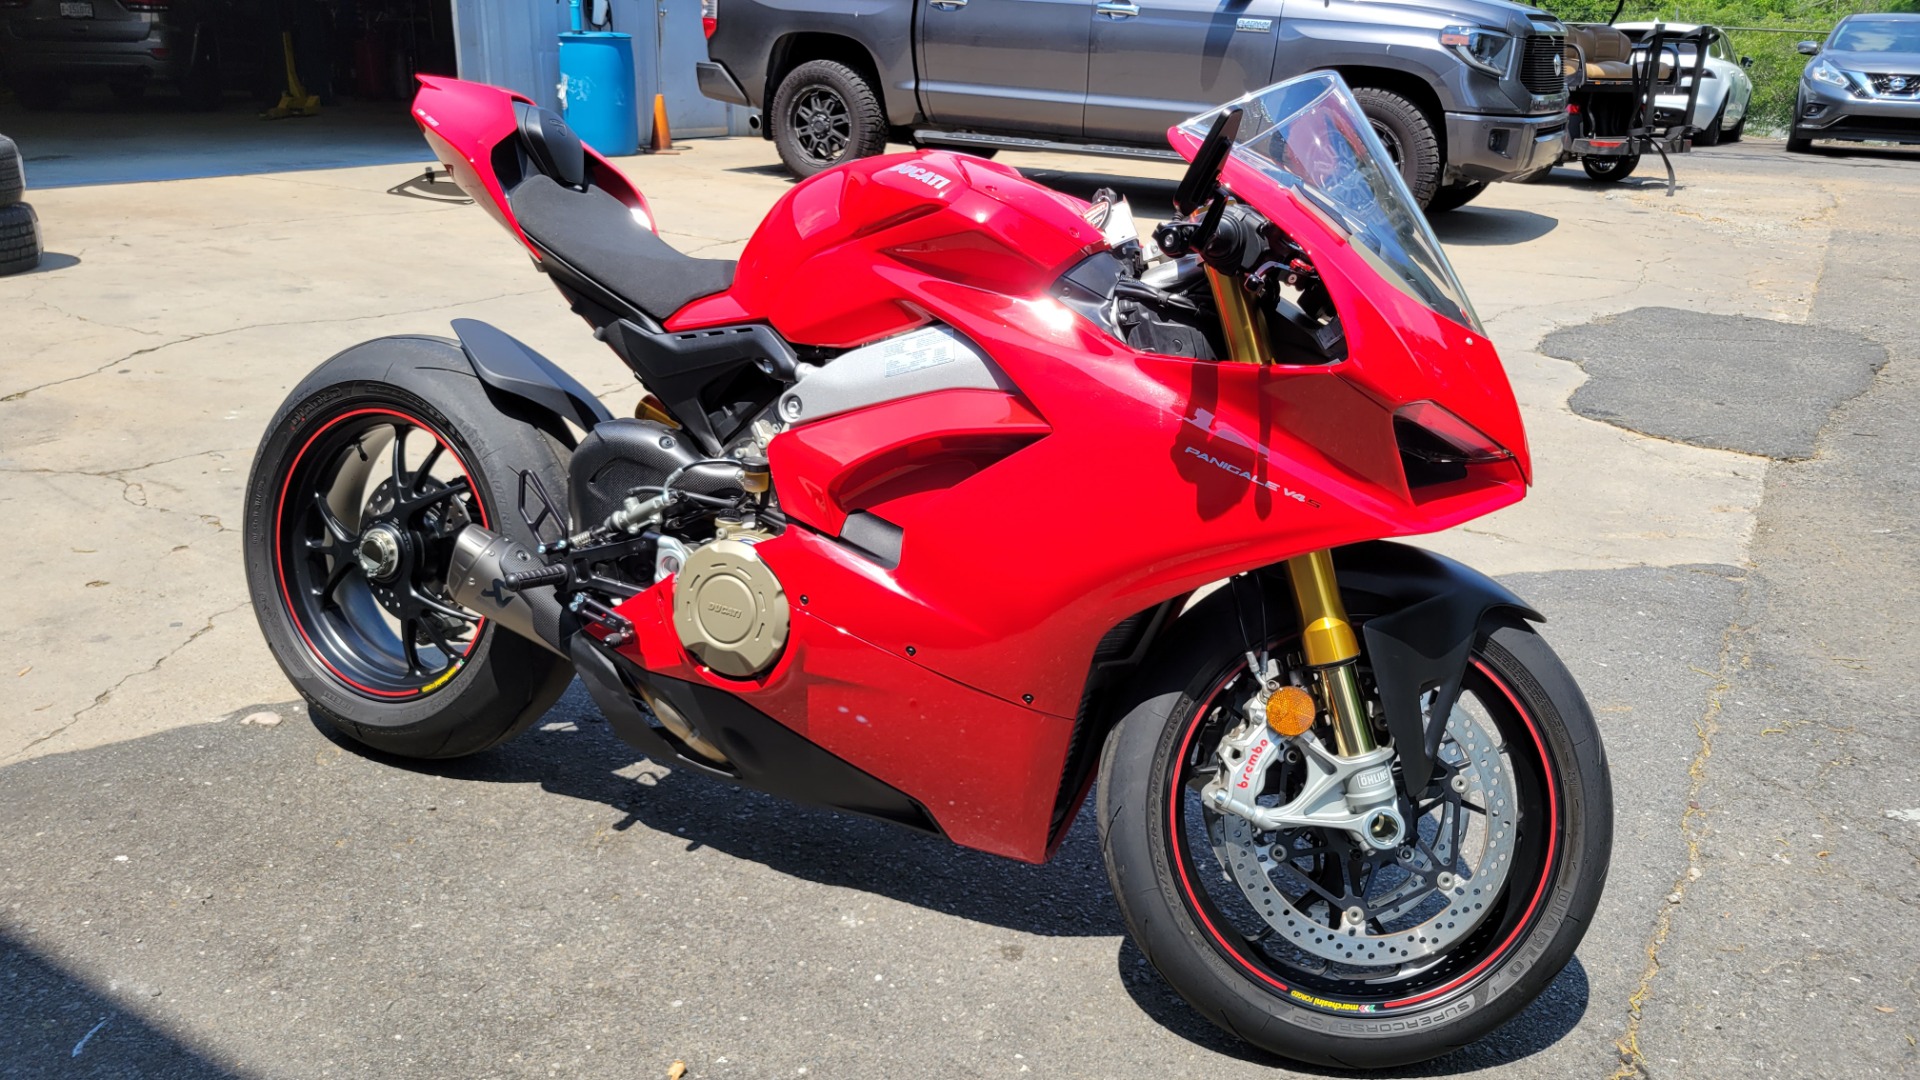 Used 2018 Ducati PANIGALE V4S / 1103CC 214HP / FUEL INJECTED / LOW MILES for sale Sold at Formula Imports in Charlotte NC 28227 3